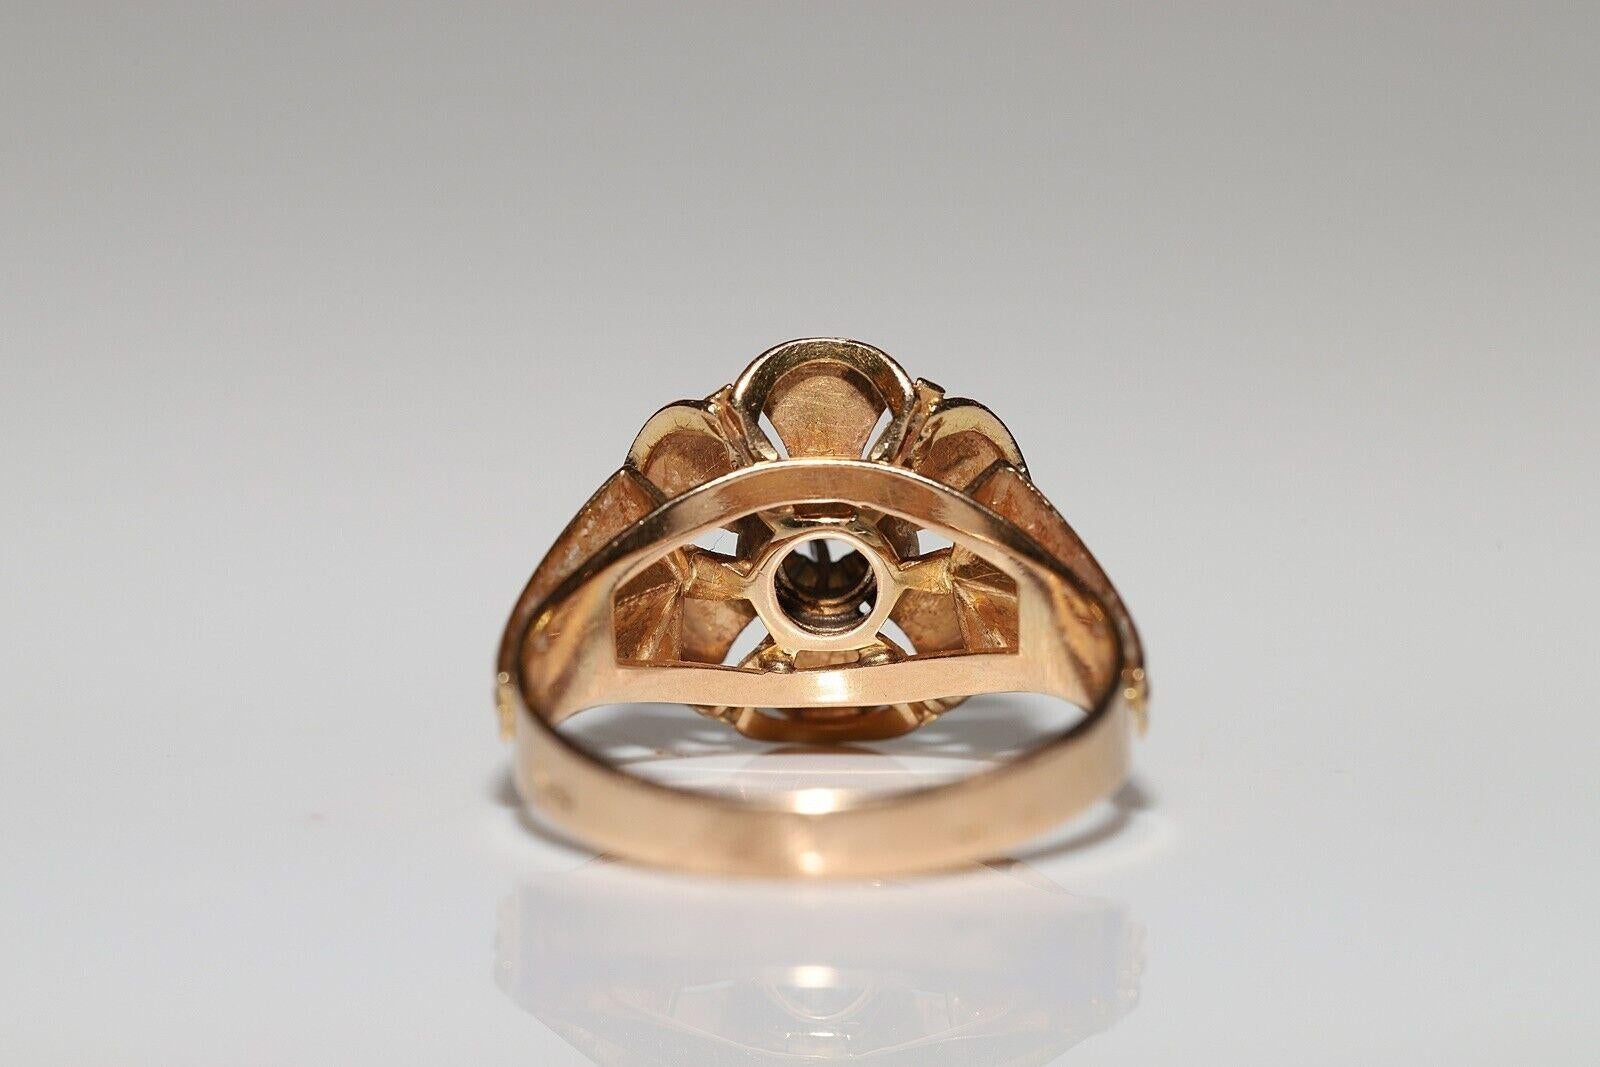 Brilliant Cut Antique Circa 1900s 18k Gold Natural Diamond Decorated Solitaire Engagement Ring For Sale